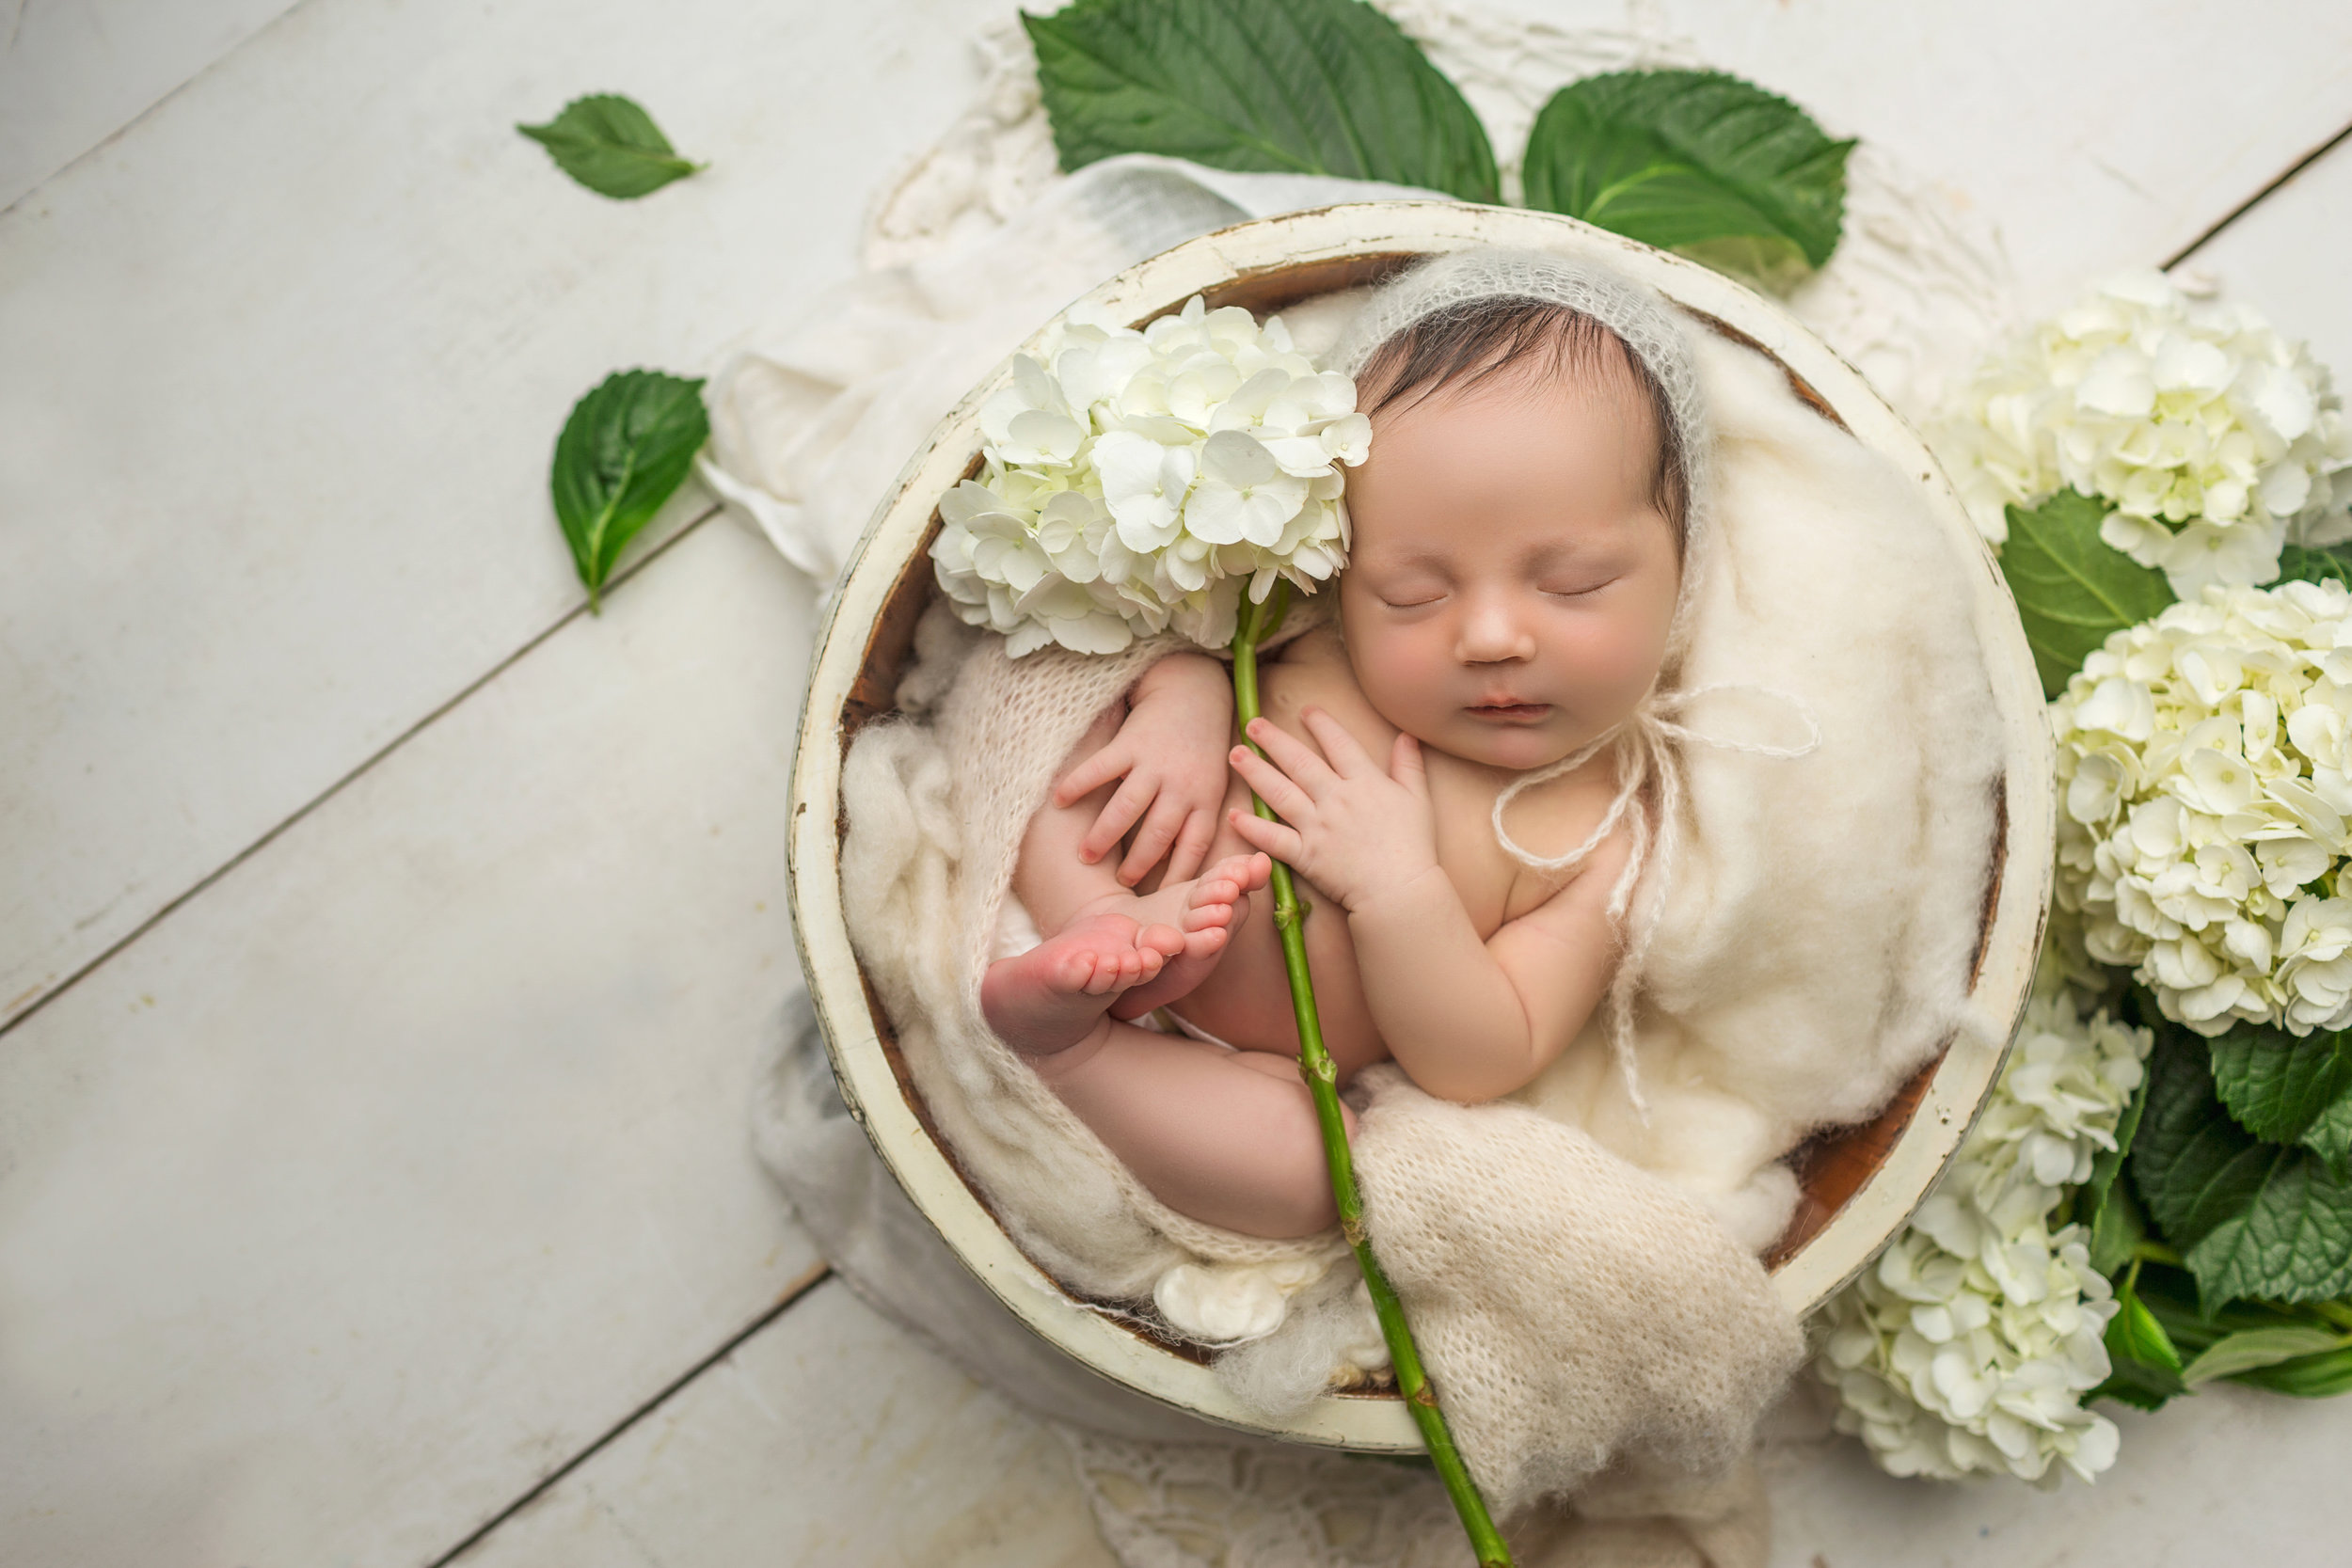 cute baby holding hydrangea while snuggled in a cream bowl